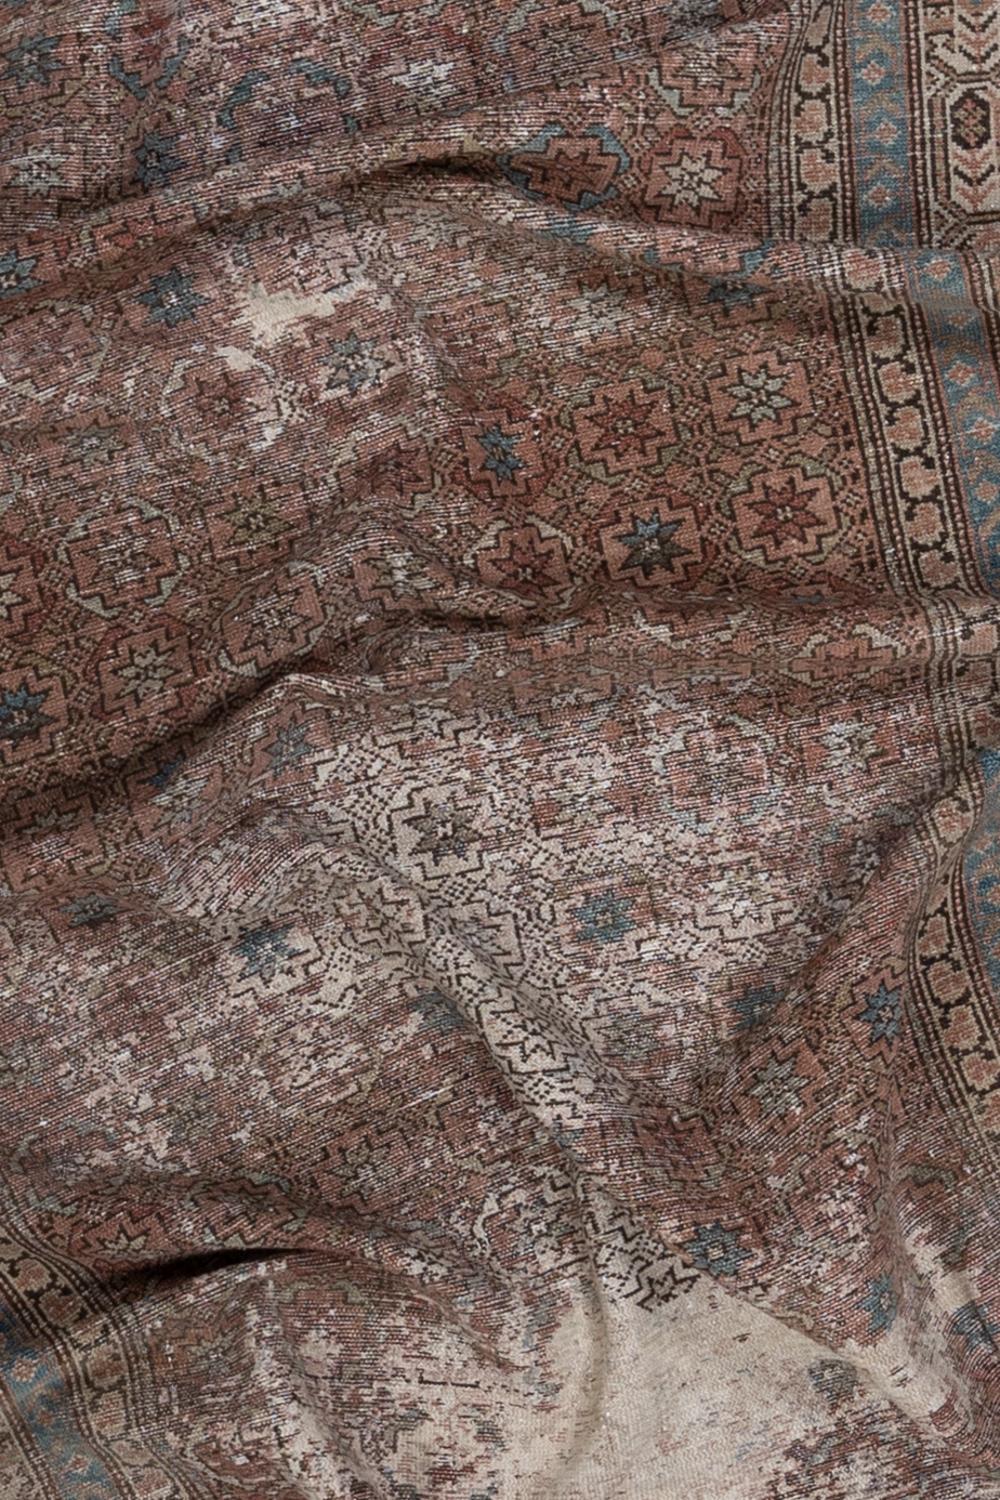 Age: Circa 1920

Colors: mauve, faded dusty rose, olive, blue, dark brown 

Pile: low

Wear Notes: 8 (wear has been reinforced and patching is secure. It is left this way for aesthetics.)

Material: wool on cotton 

Early 20th century Malayer rug